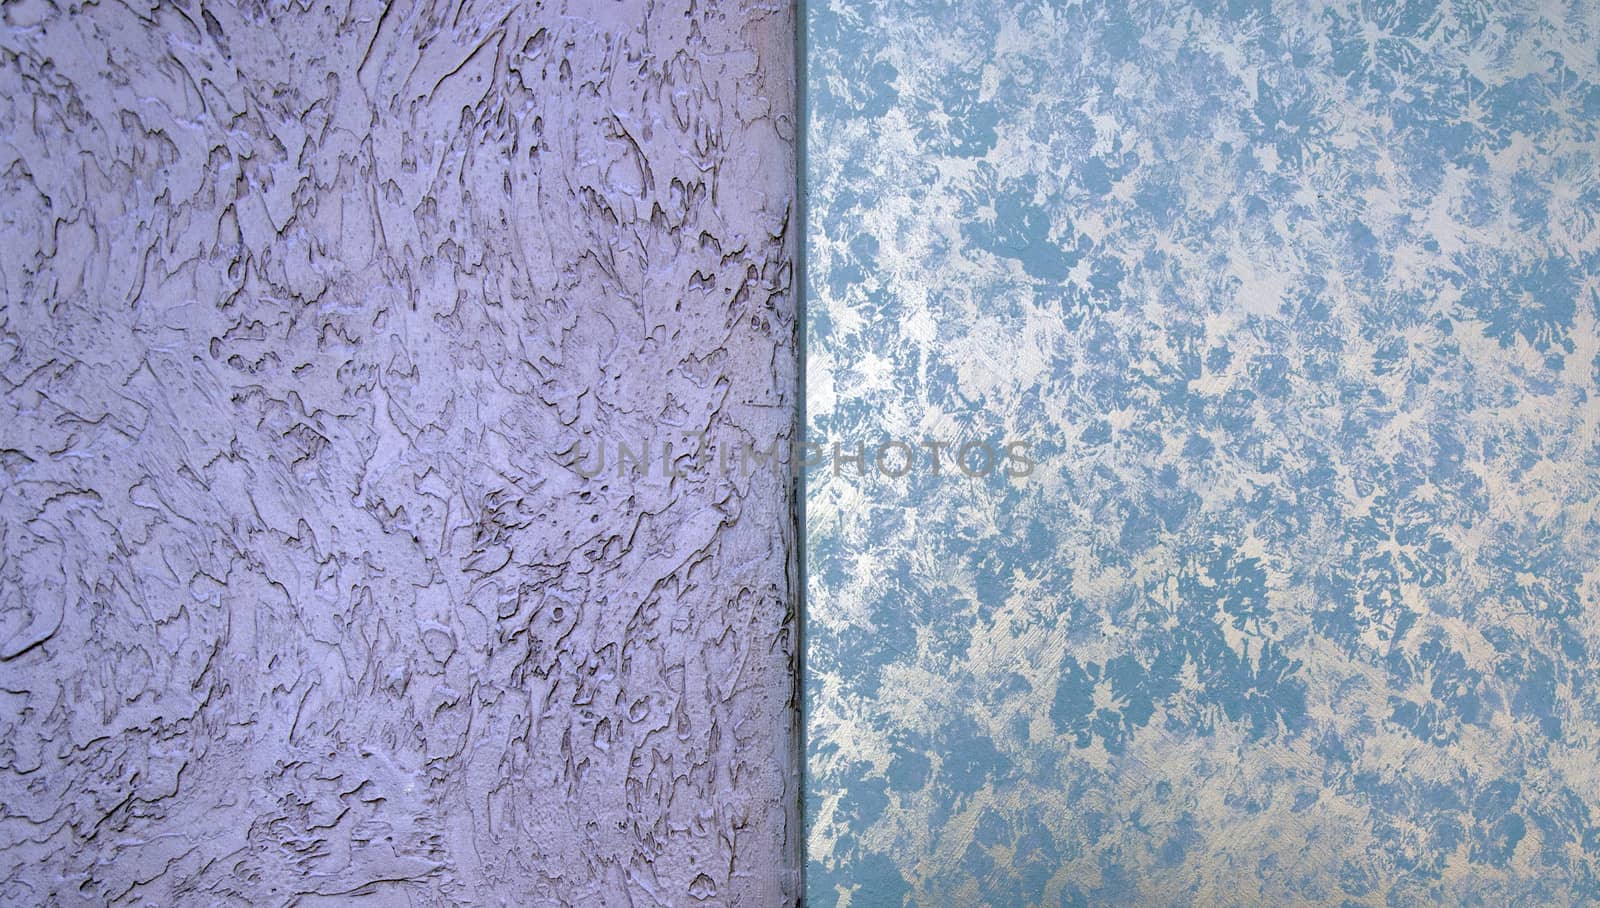 The abstract double background wallpaper and rough paint stains